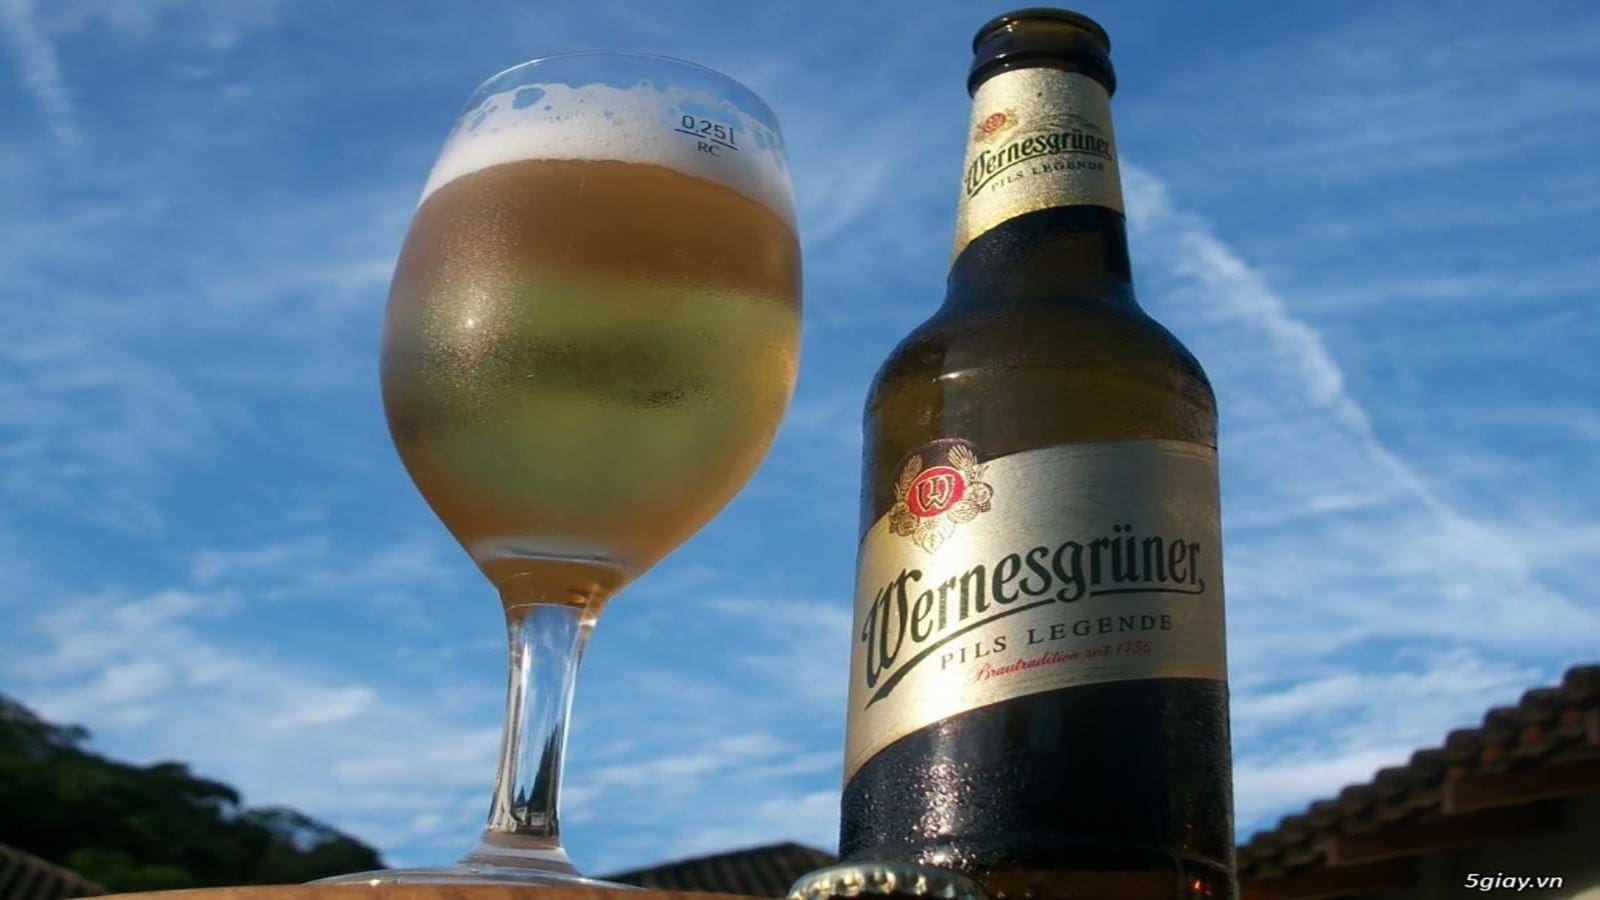 Carlsberg set to acquire Germany’s most modern brewery Wernesgrüner Brewery